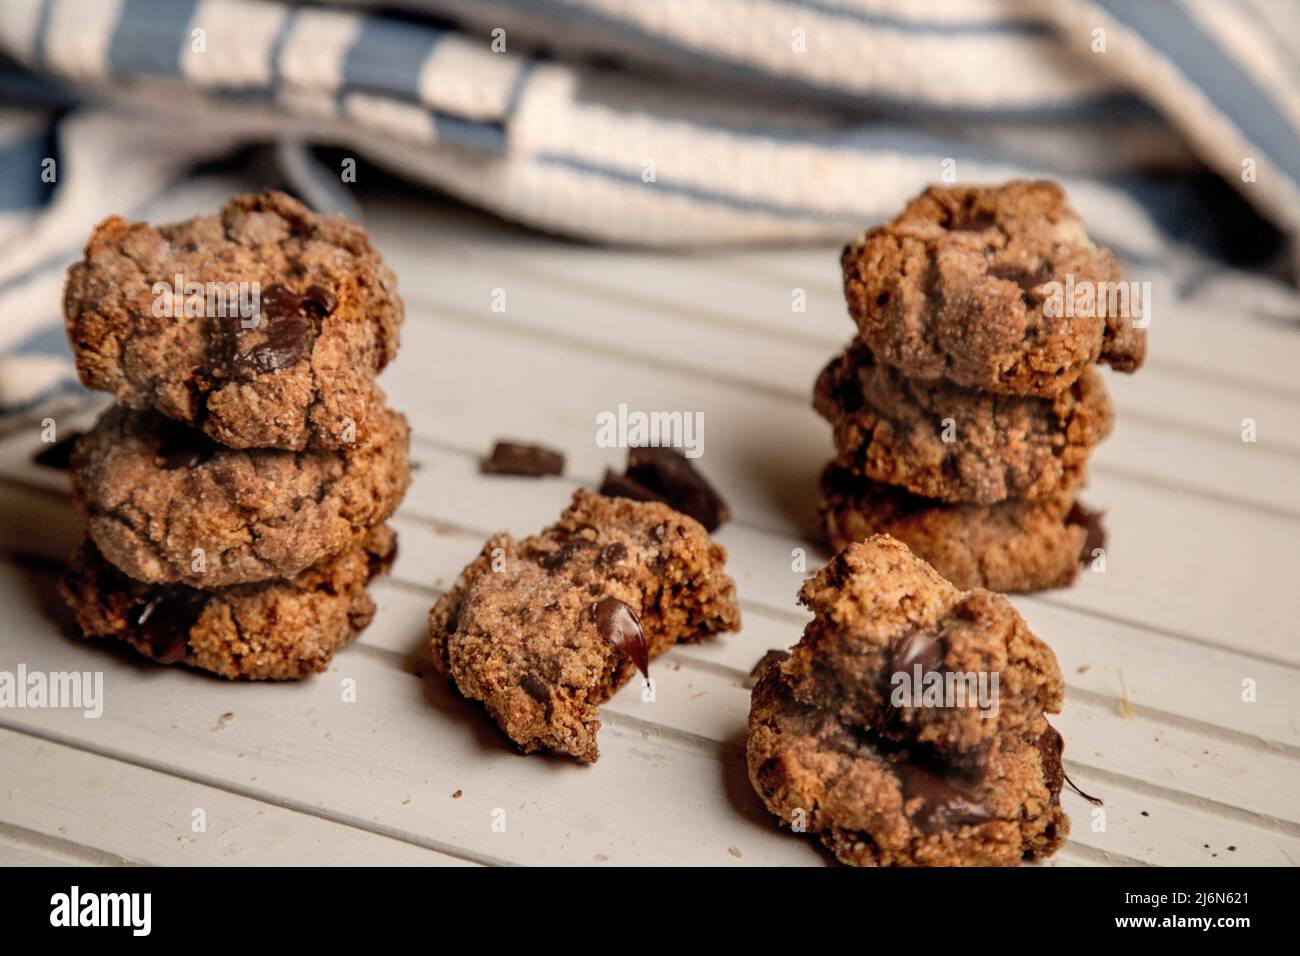 Paleo Chocolate Chip Cookies on White table. Stock Photo